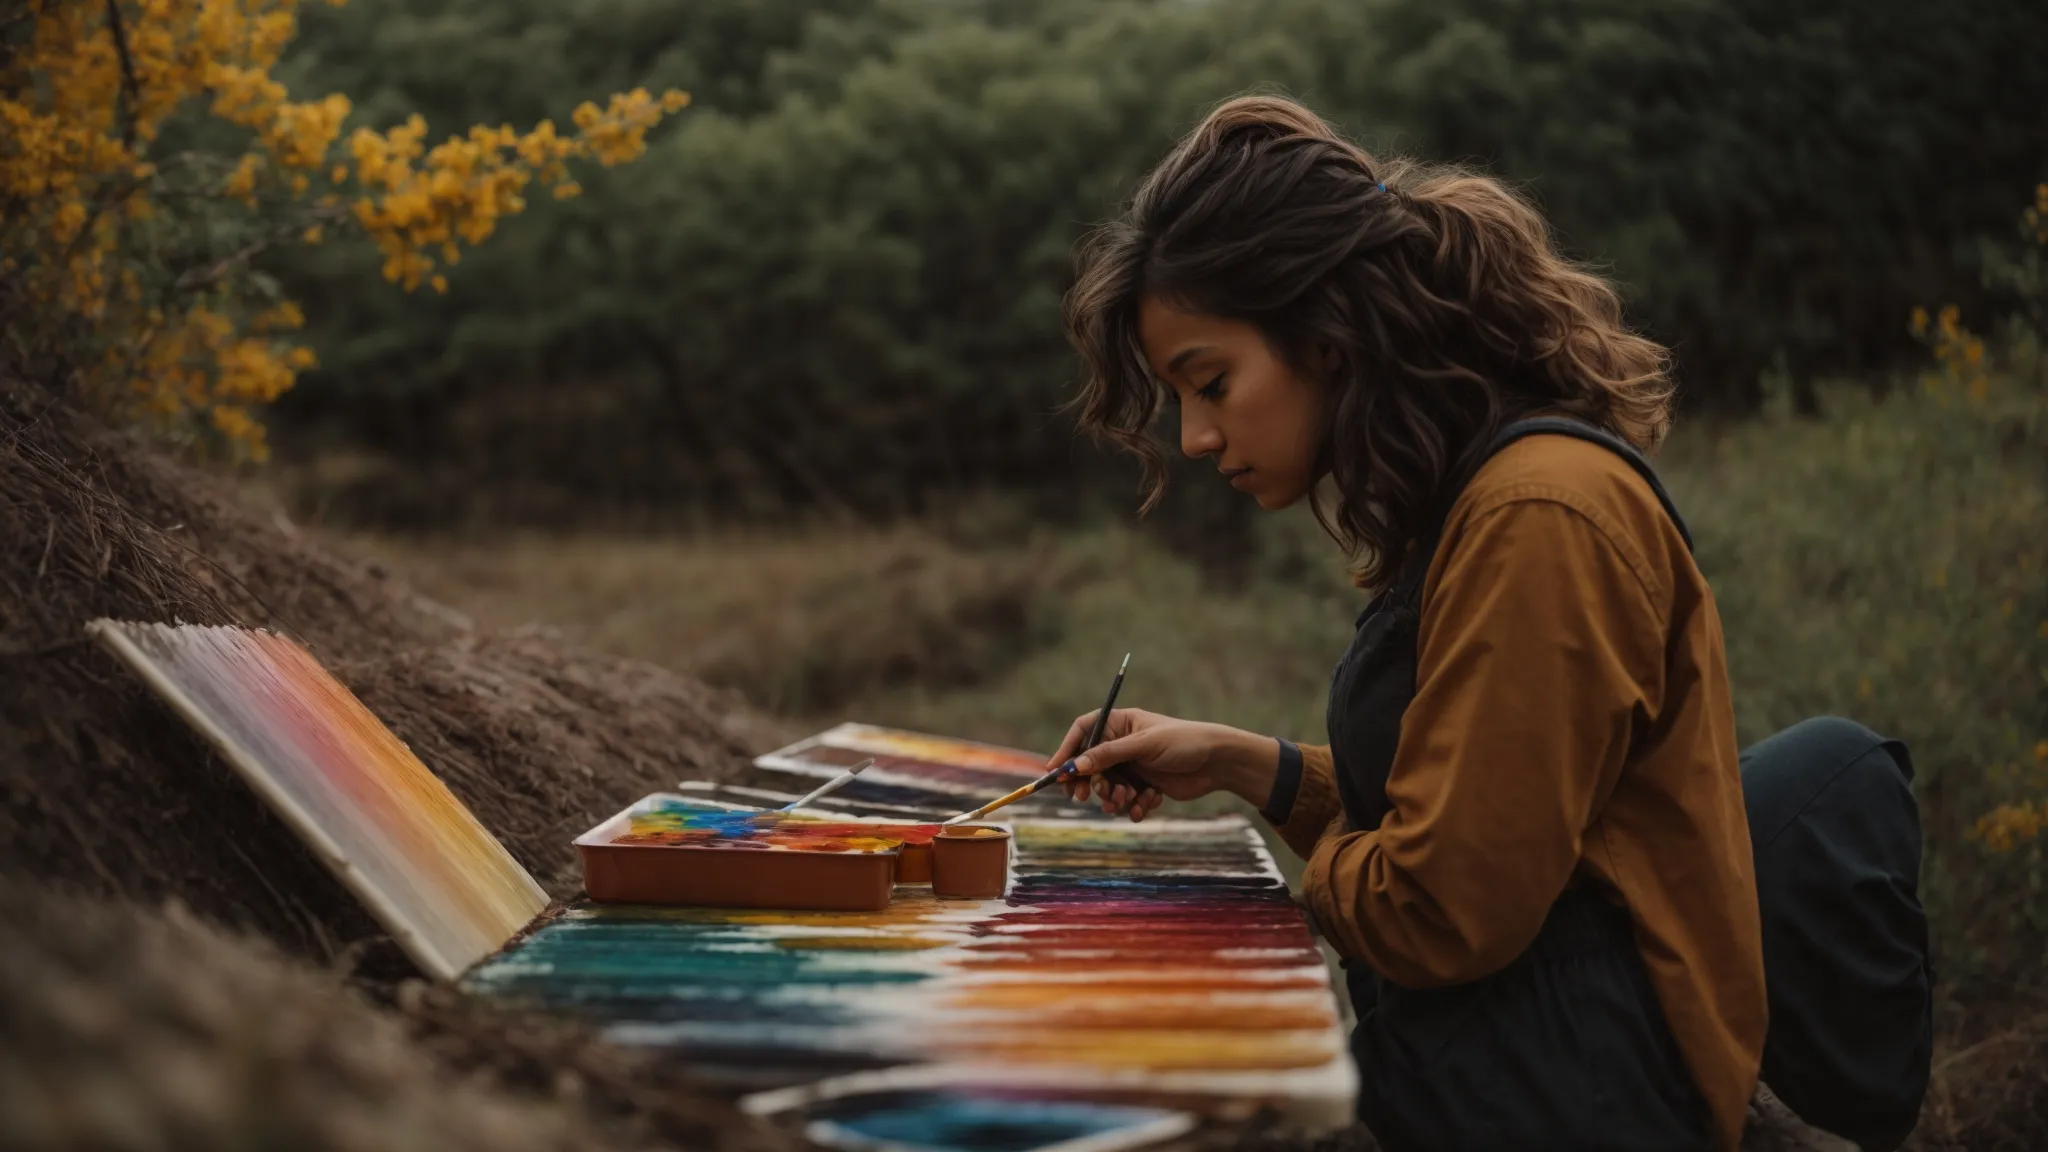 an artist thoughtfully selecting different colors from a vibrant palette to paint a dynamic landscape.